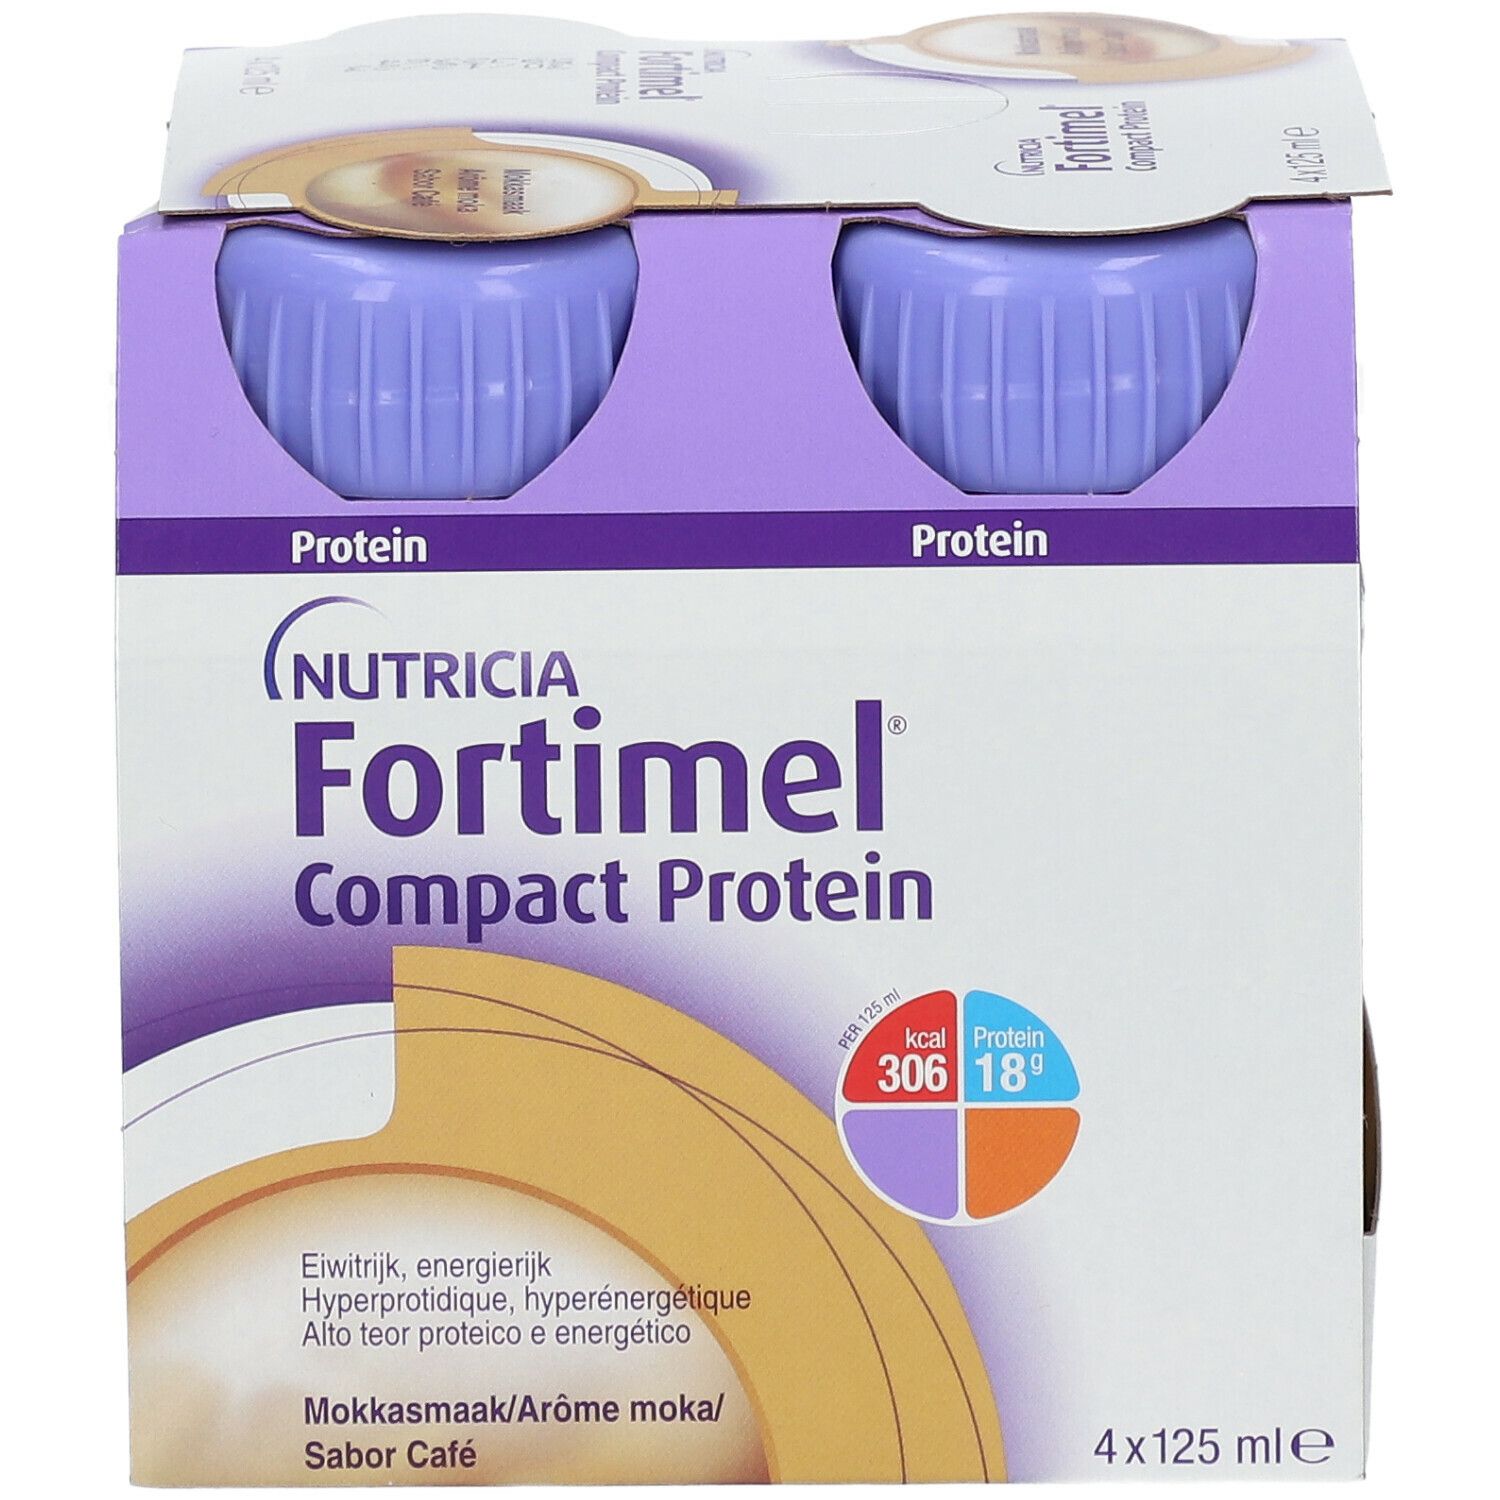 Fortimel® Compact Protein Moka